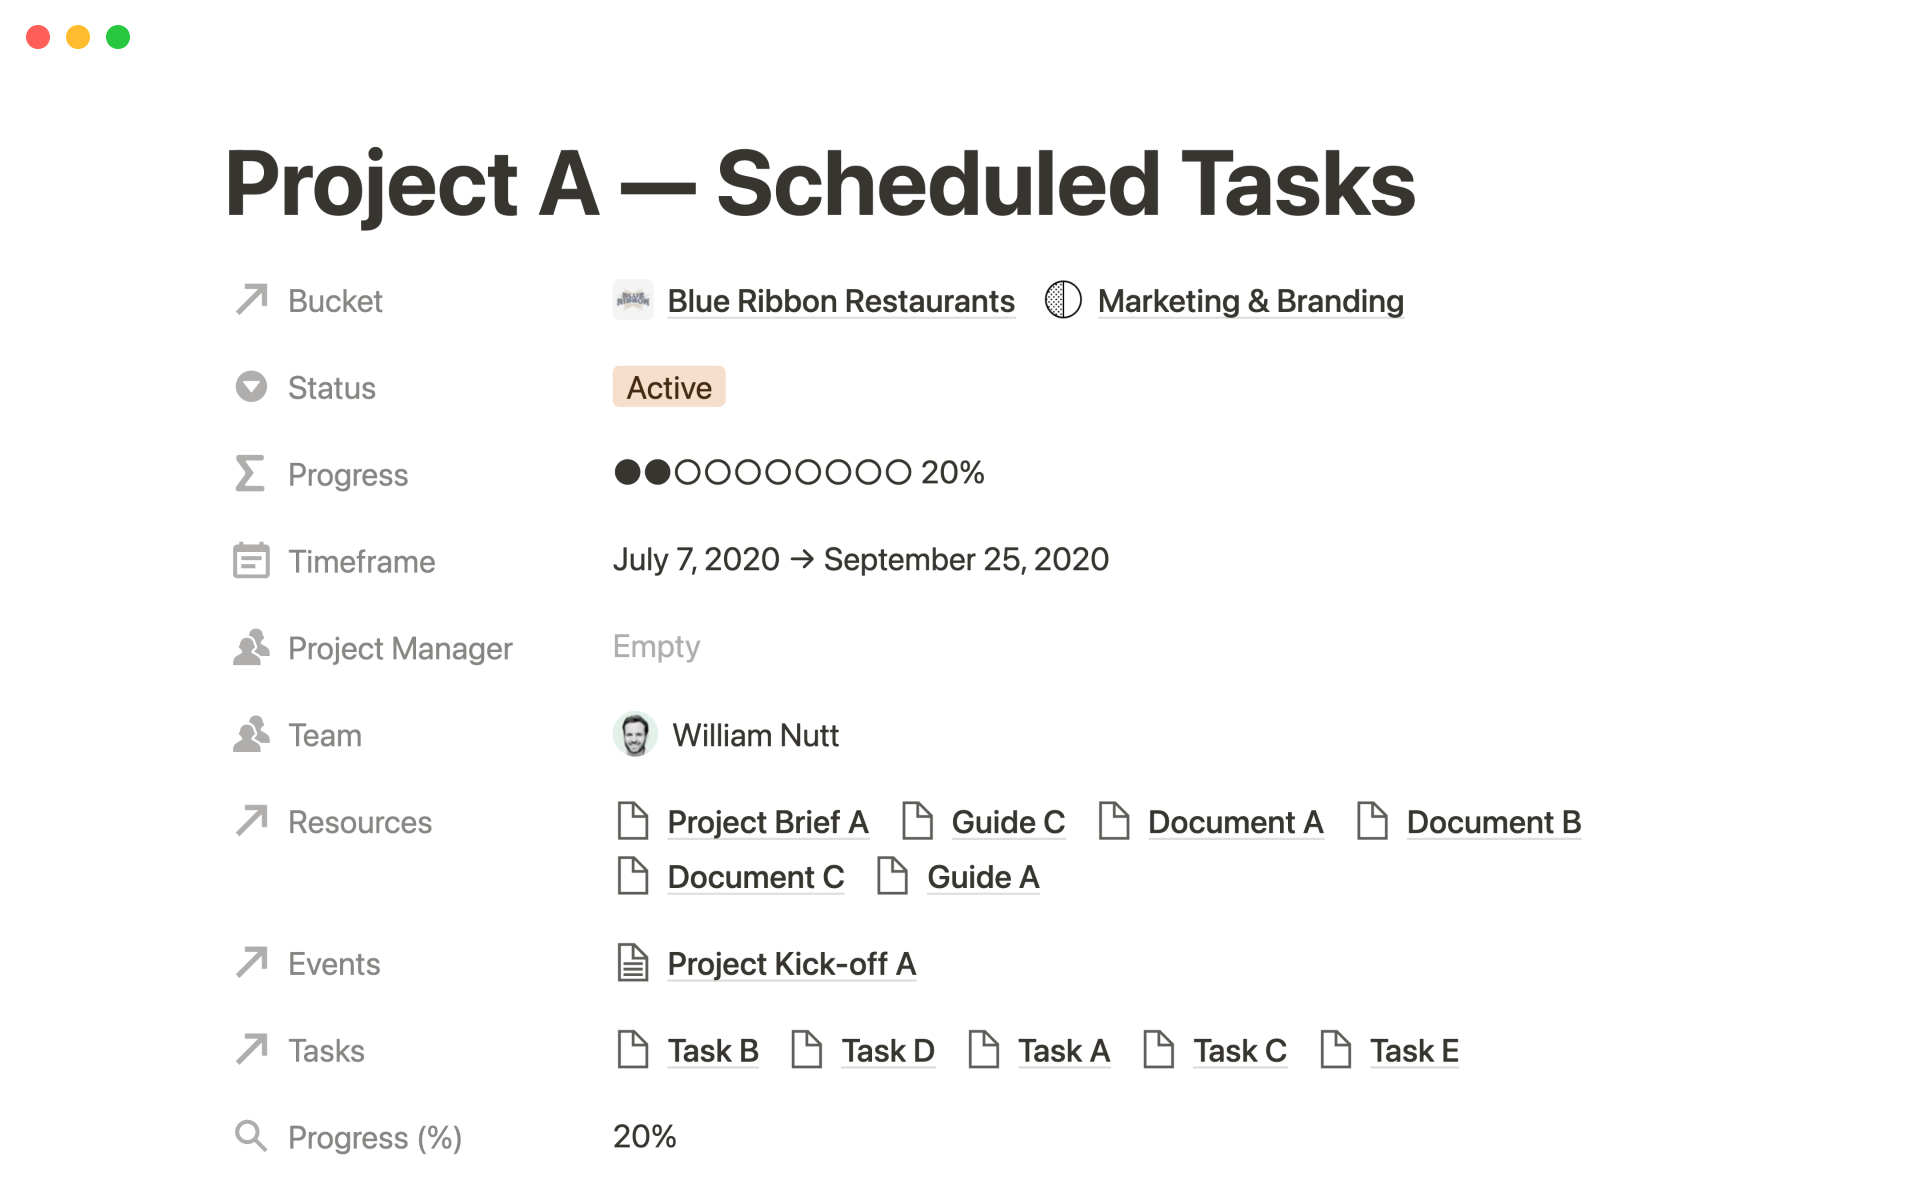 Plan and track projects from start to finish